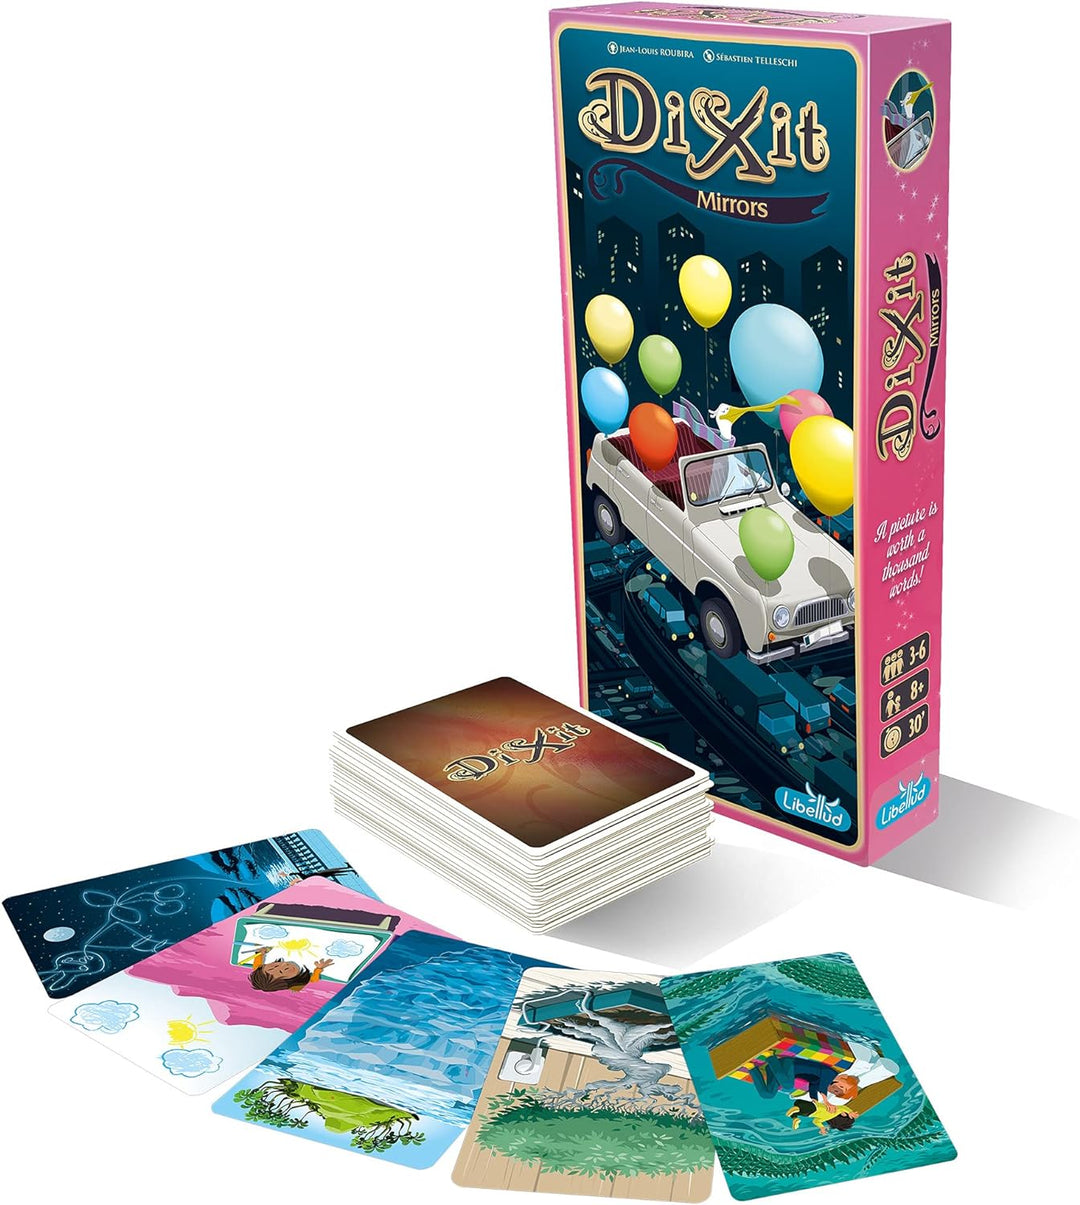 Libellud - Dixit: Mirrors - Board Game